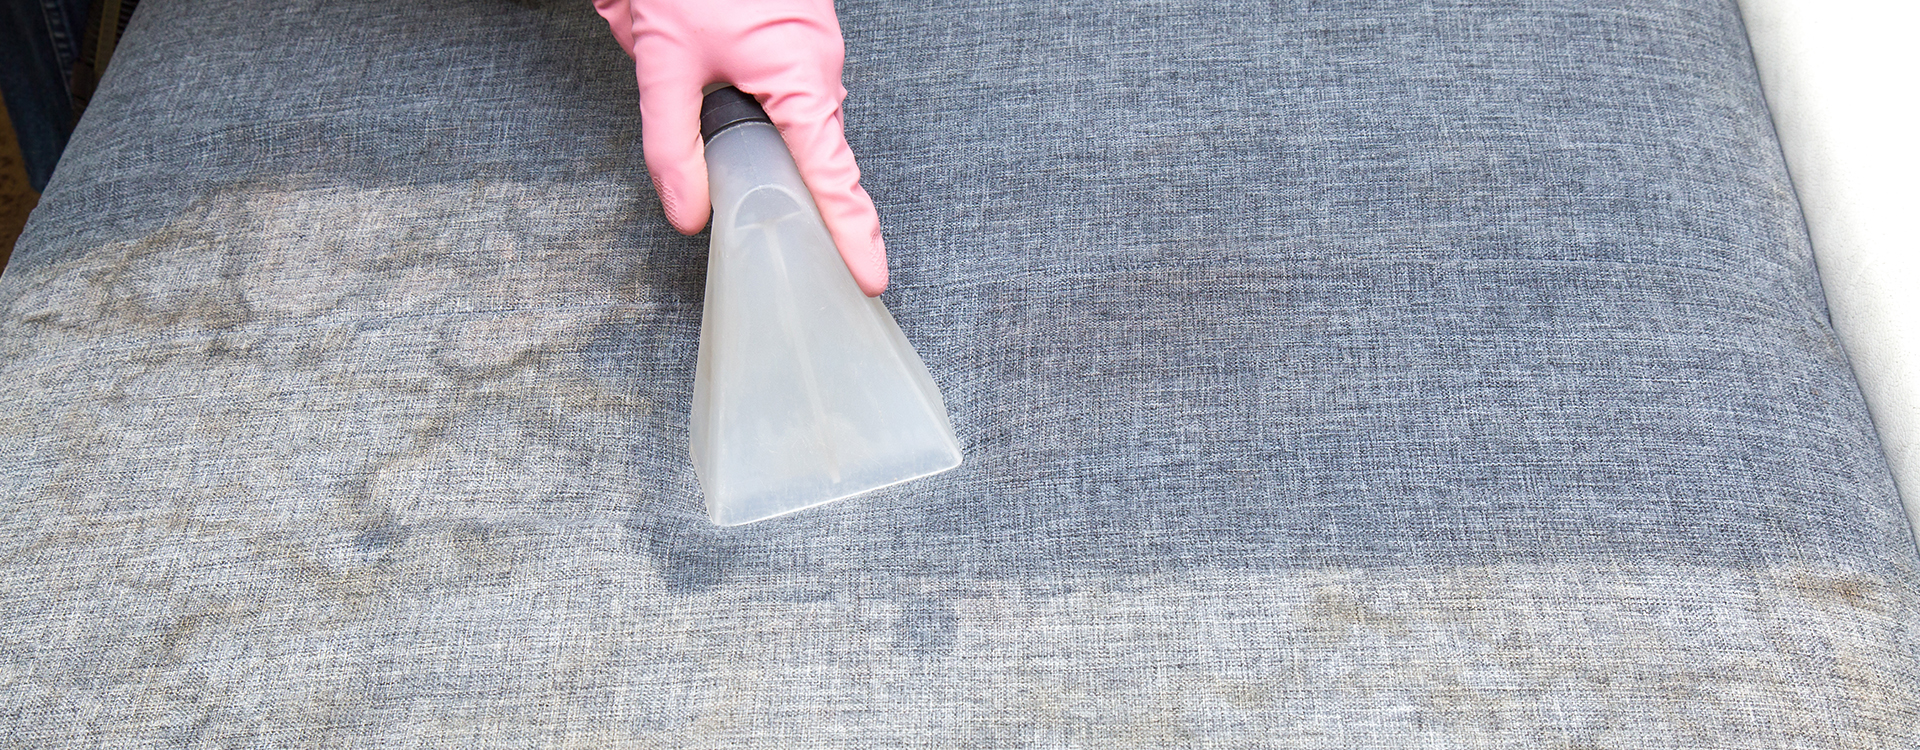 Upholstery cleaning in Merseyside